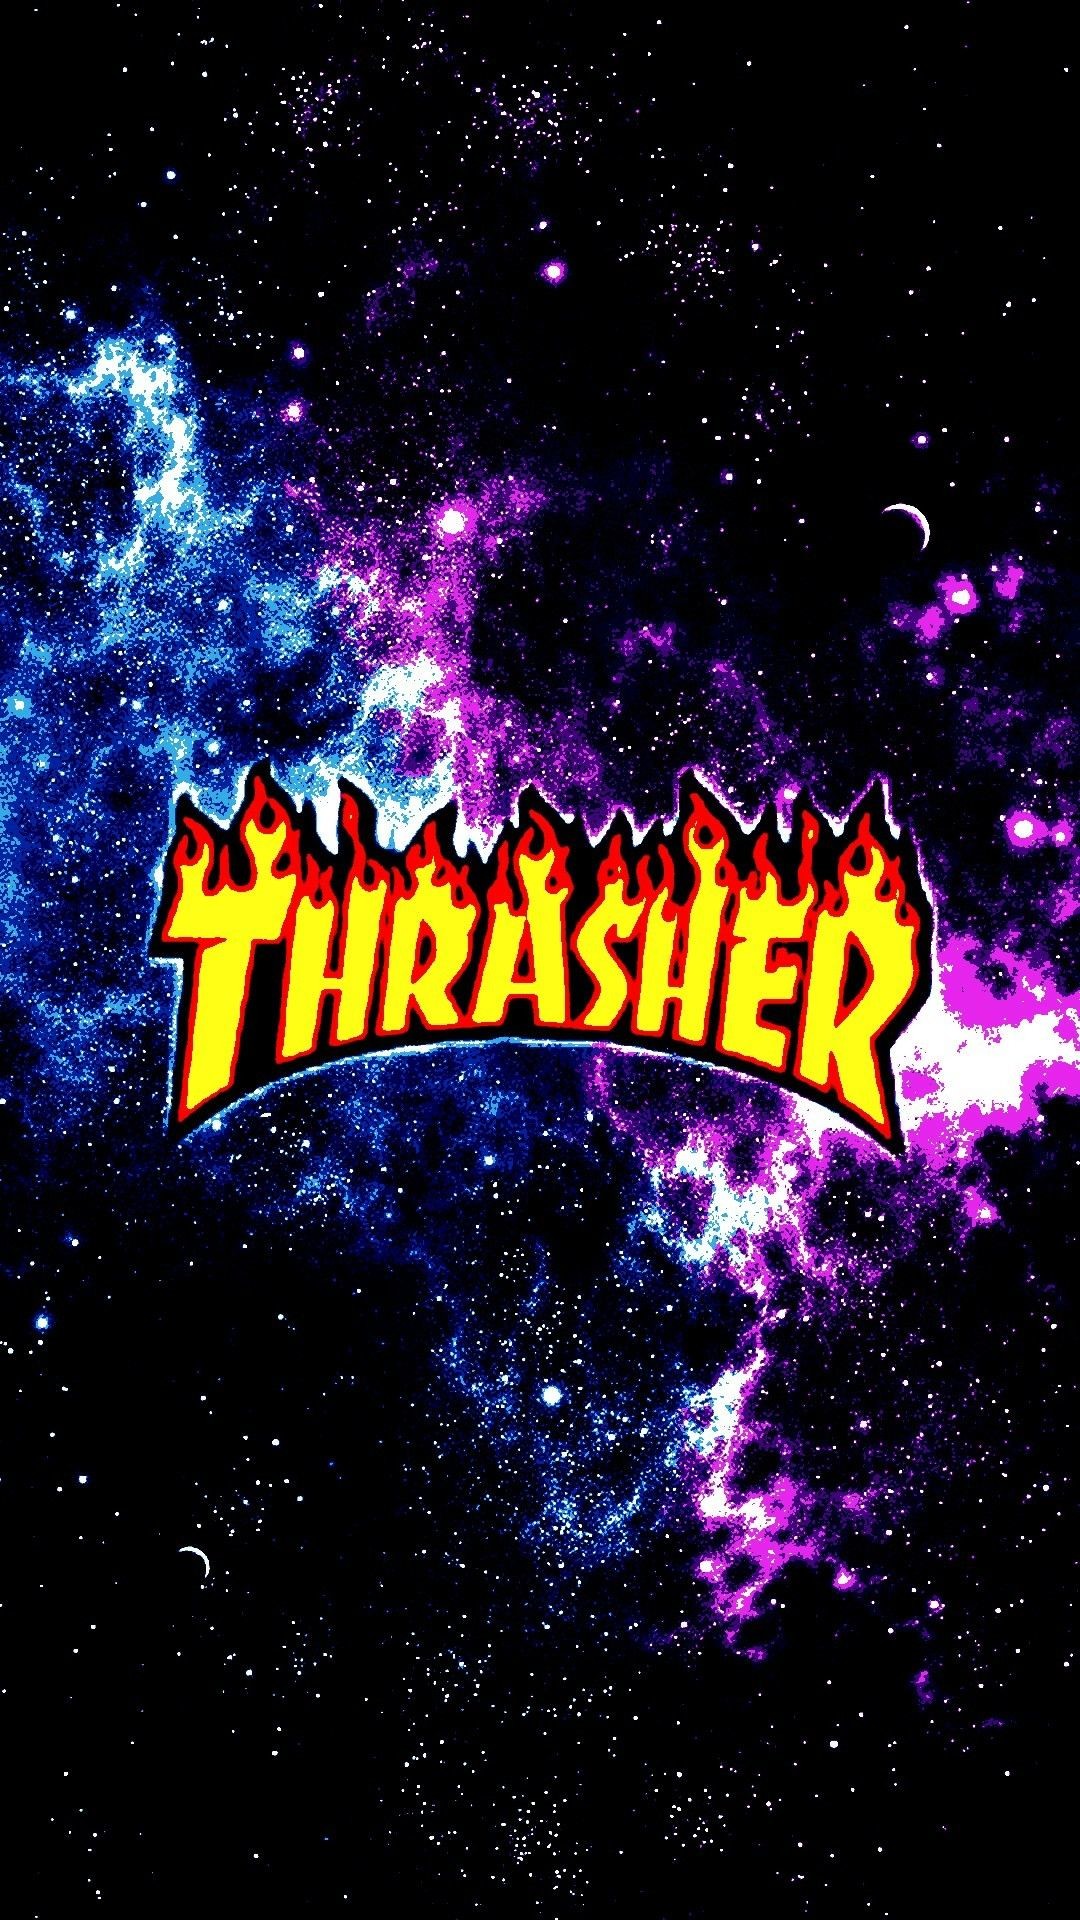 1080x1920 Galaxy Thrasher I actually have this my background on my phone | Danielle  bregoli in 2019 | Pinterest | Iphone wallpaper, Wallpaper backgrounds and  ...